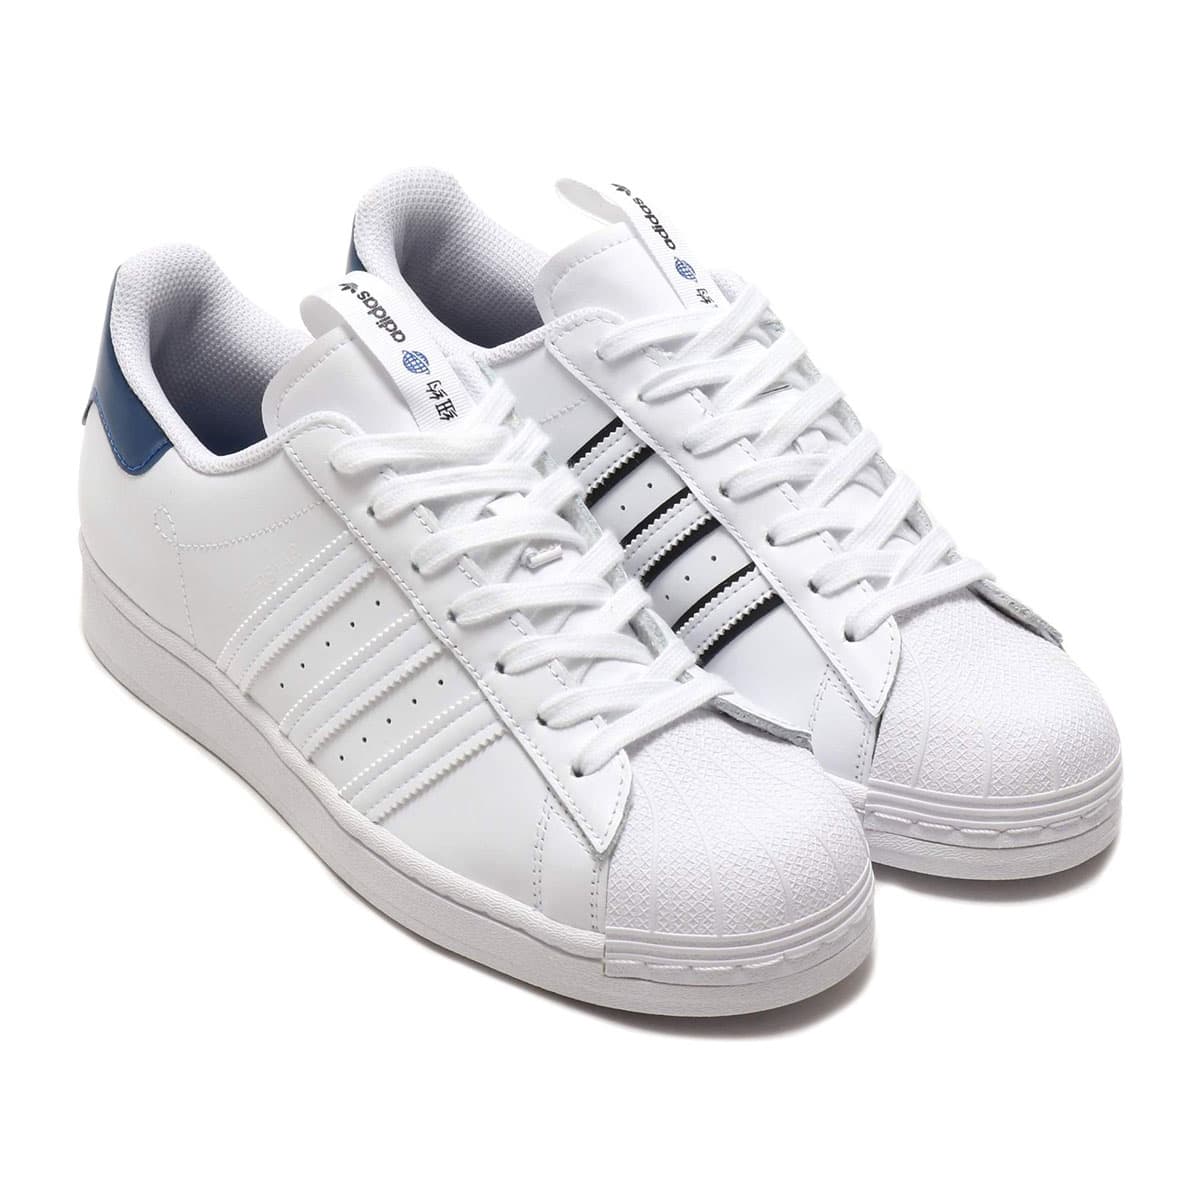 adidas SUPERSTAR FOOTWEAR WHITE/COLLEGE ROYAL/CORE BLACK 20SS-I_photo_large